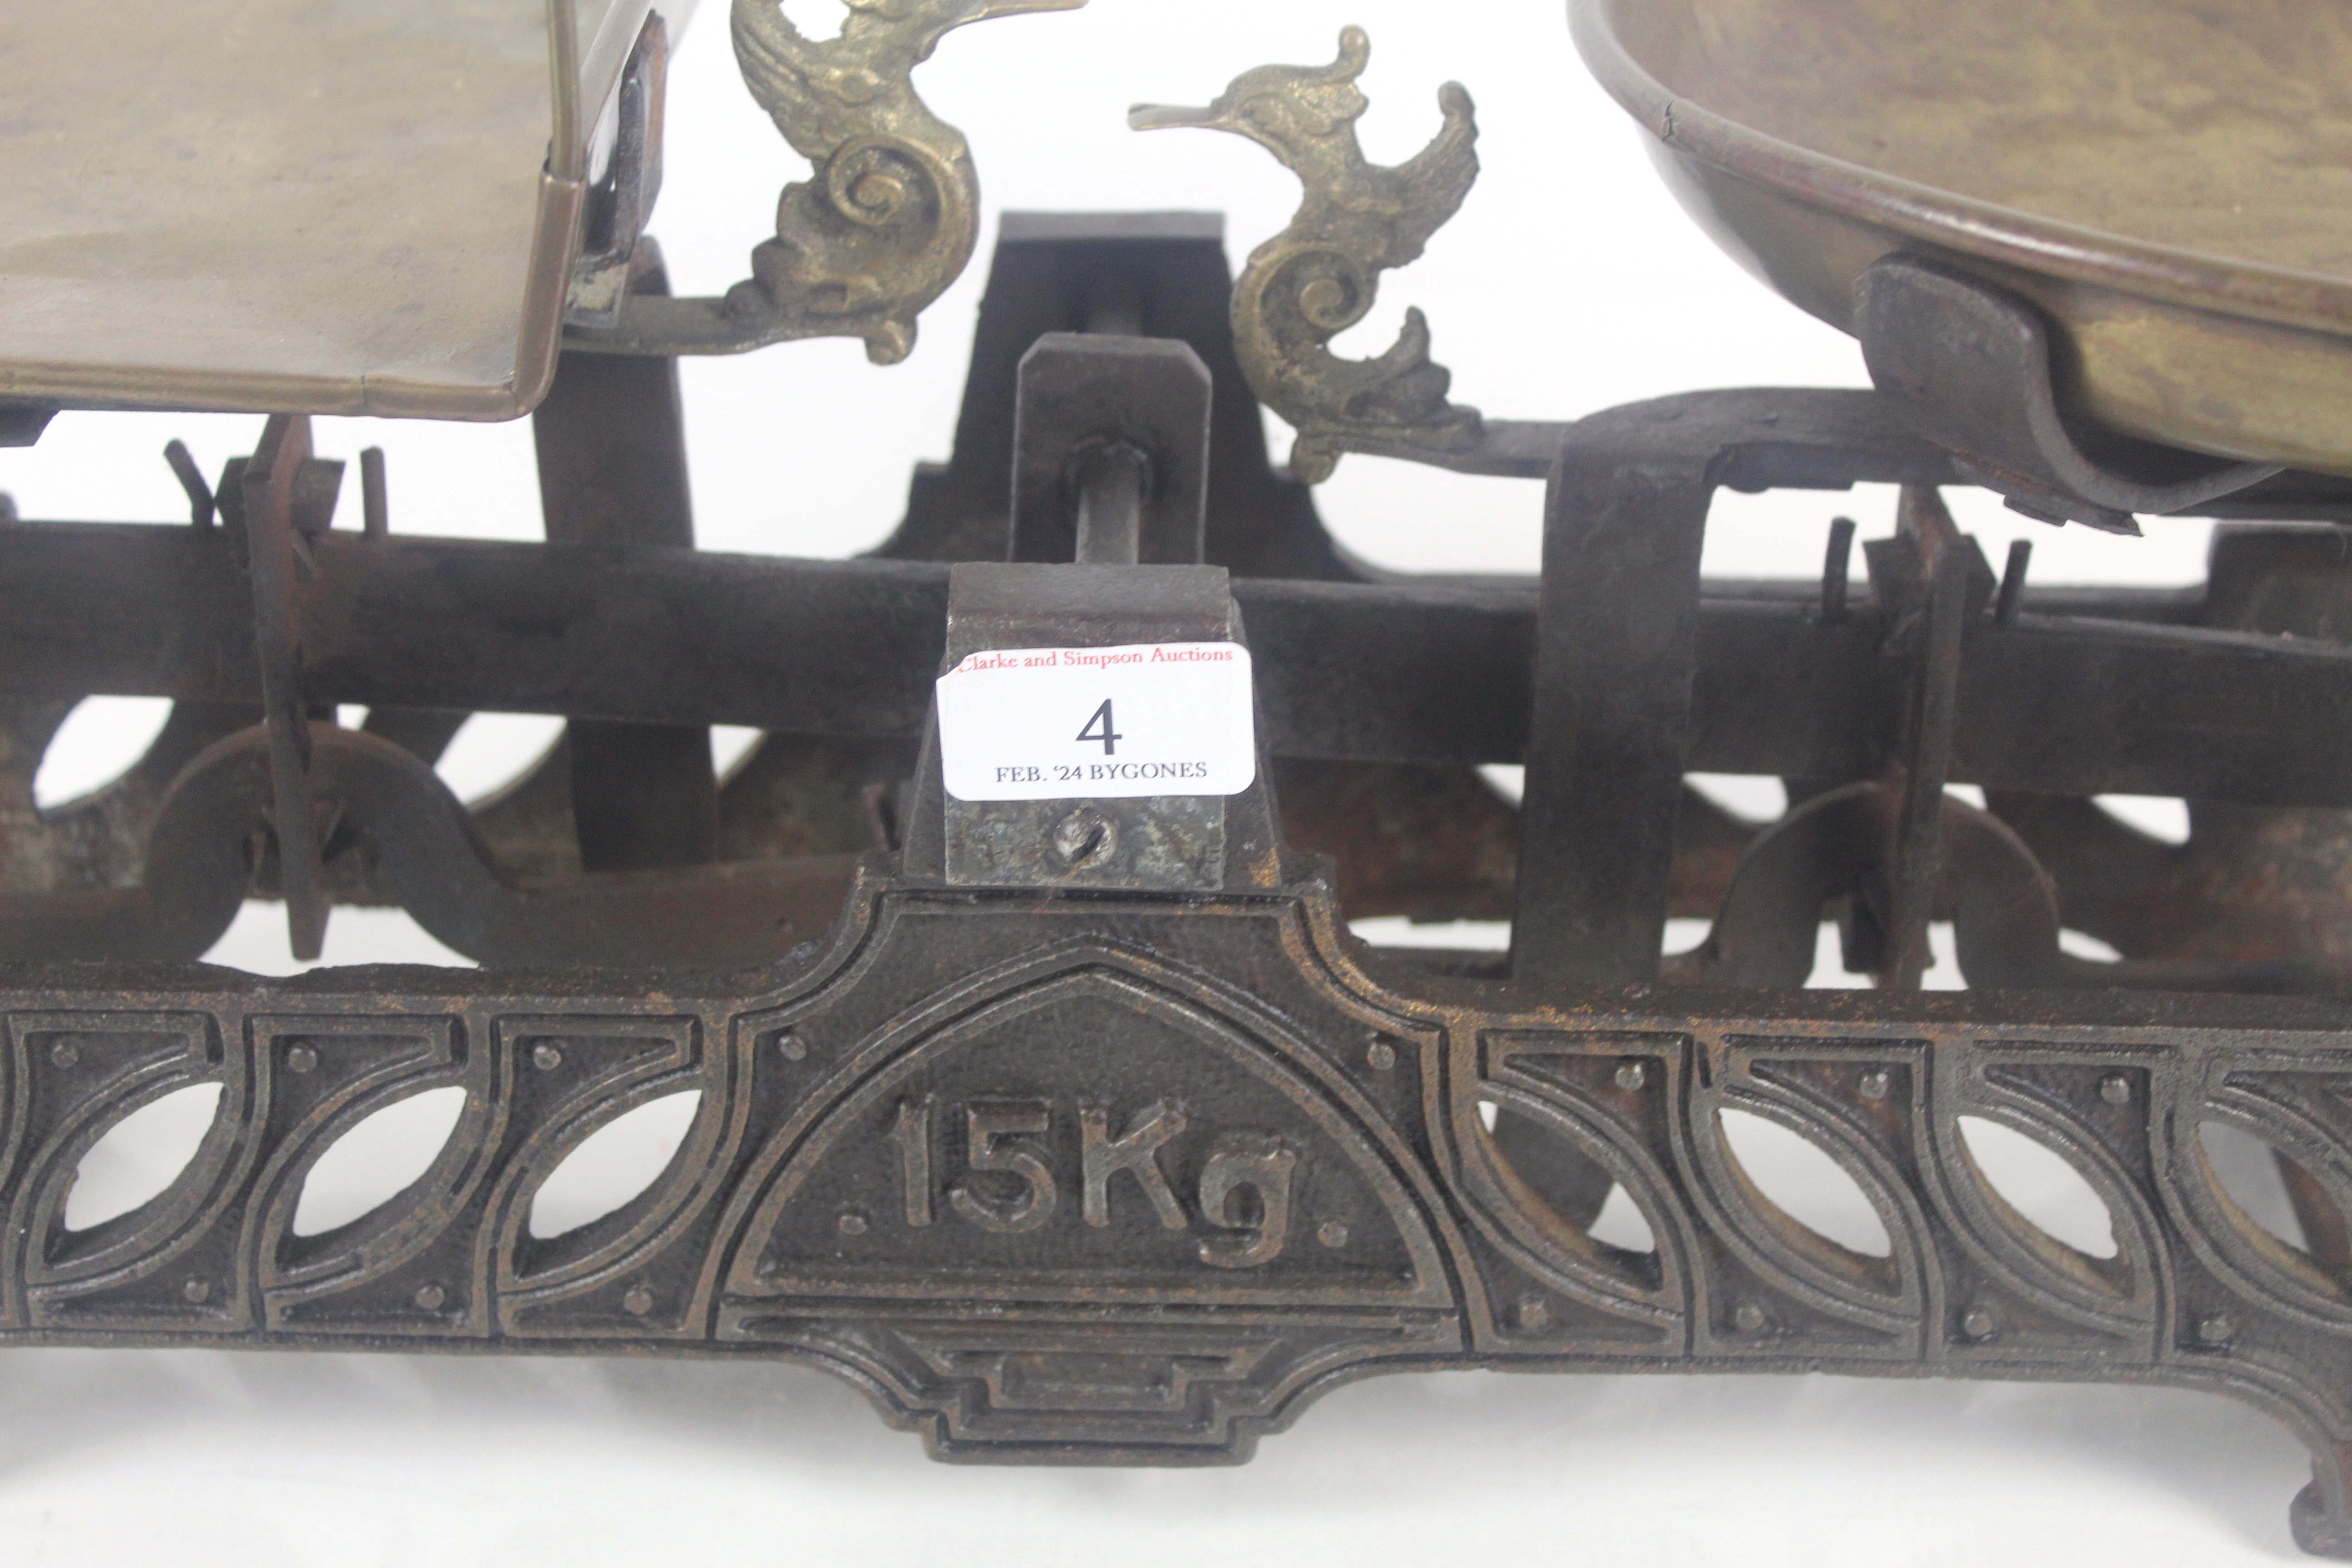 A set of vintage 15kg shop scales with brass pans - Image 4 of 15